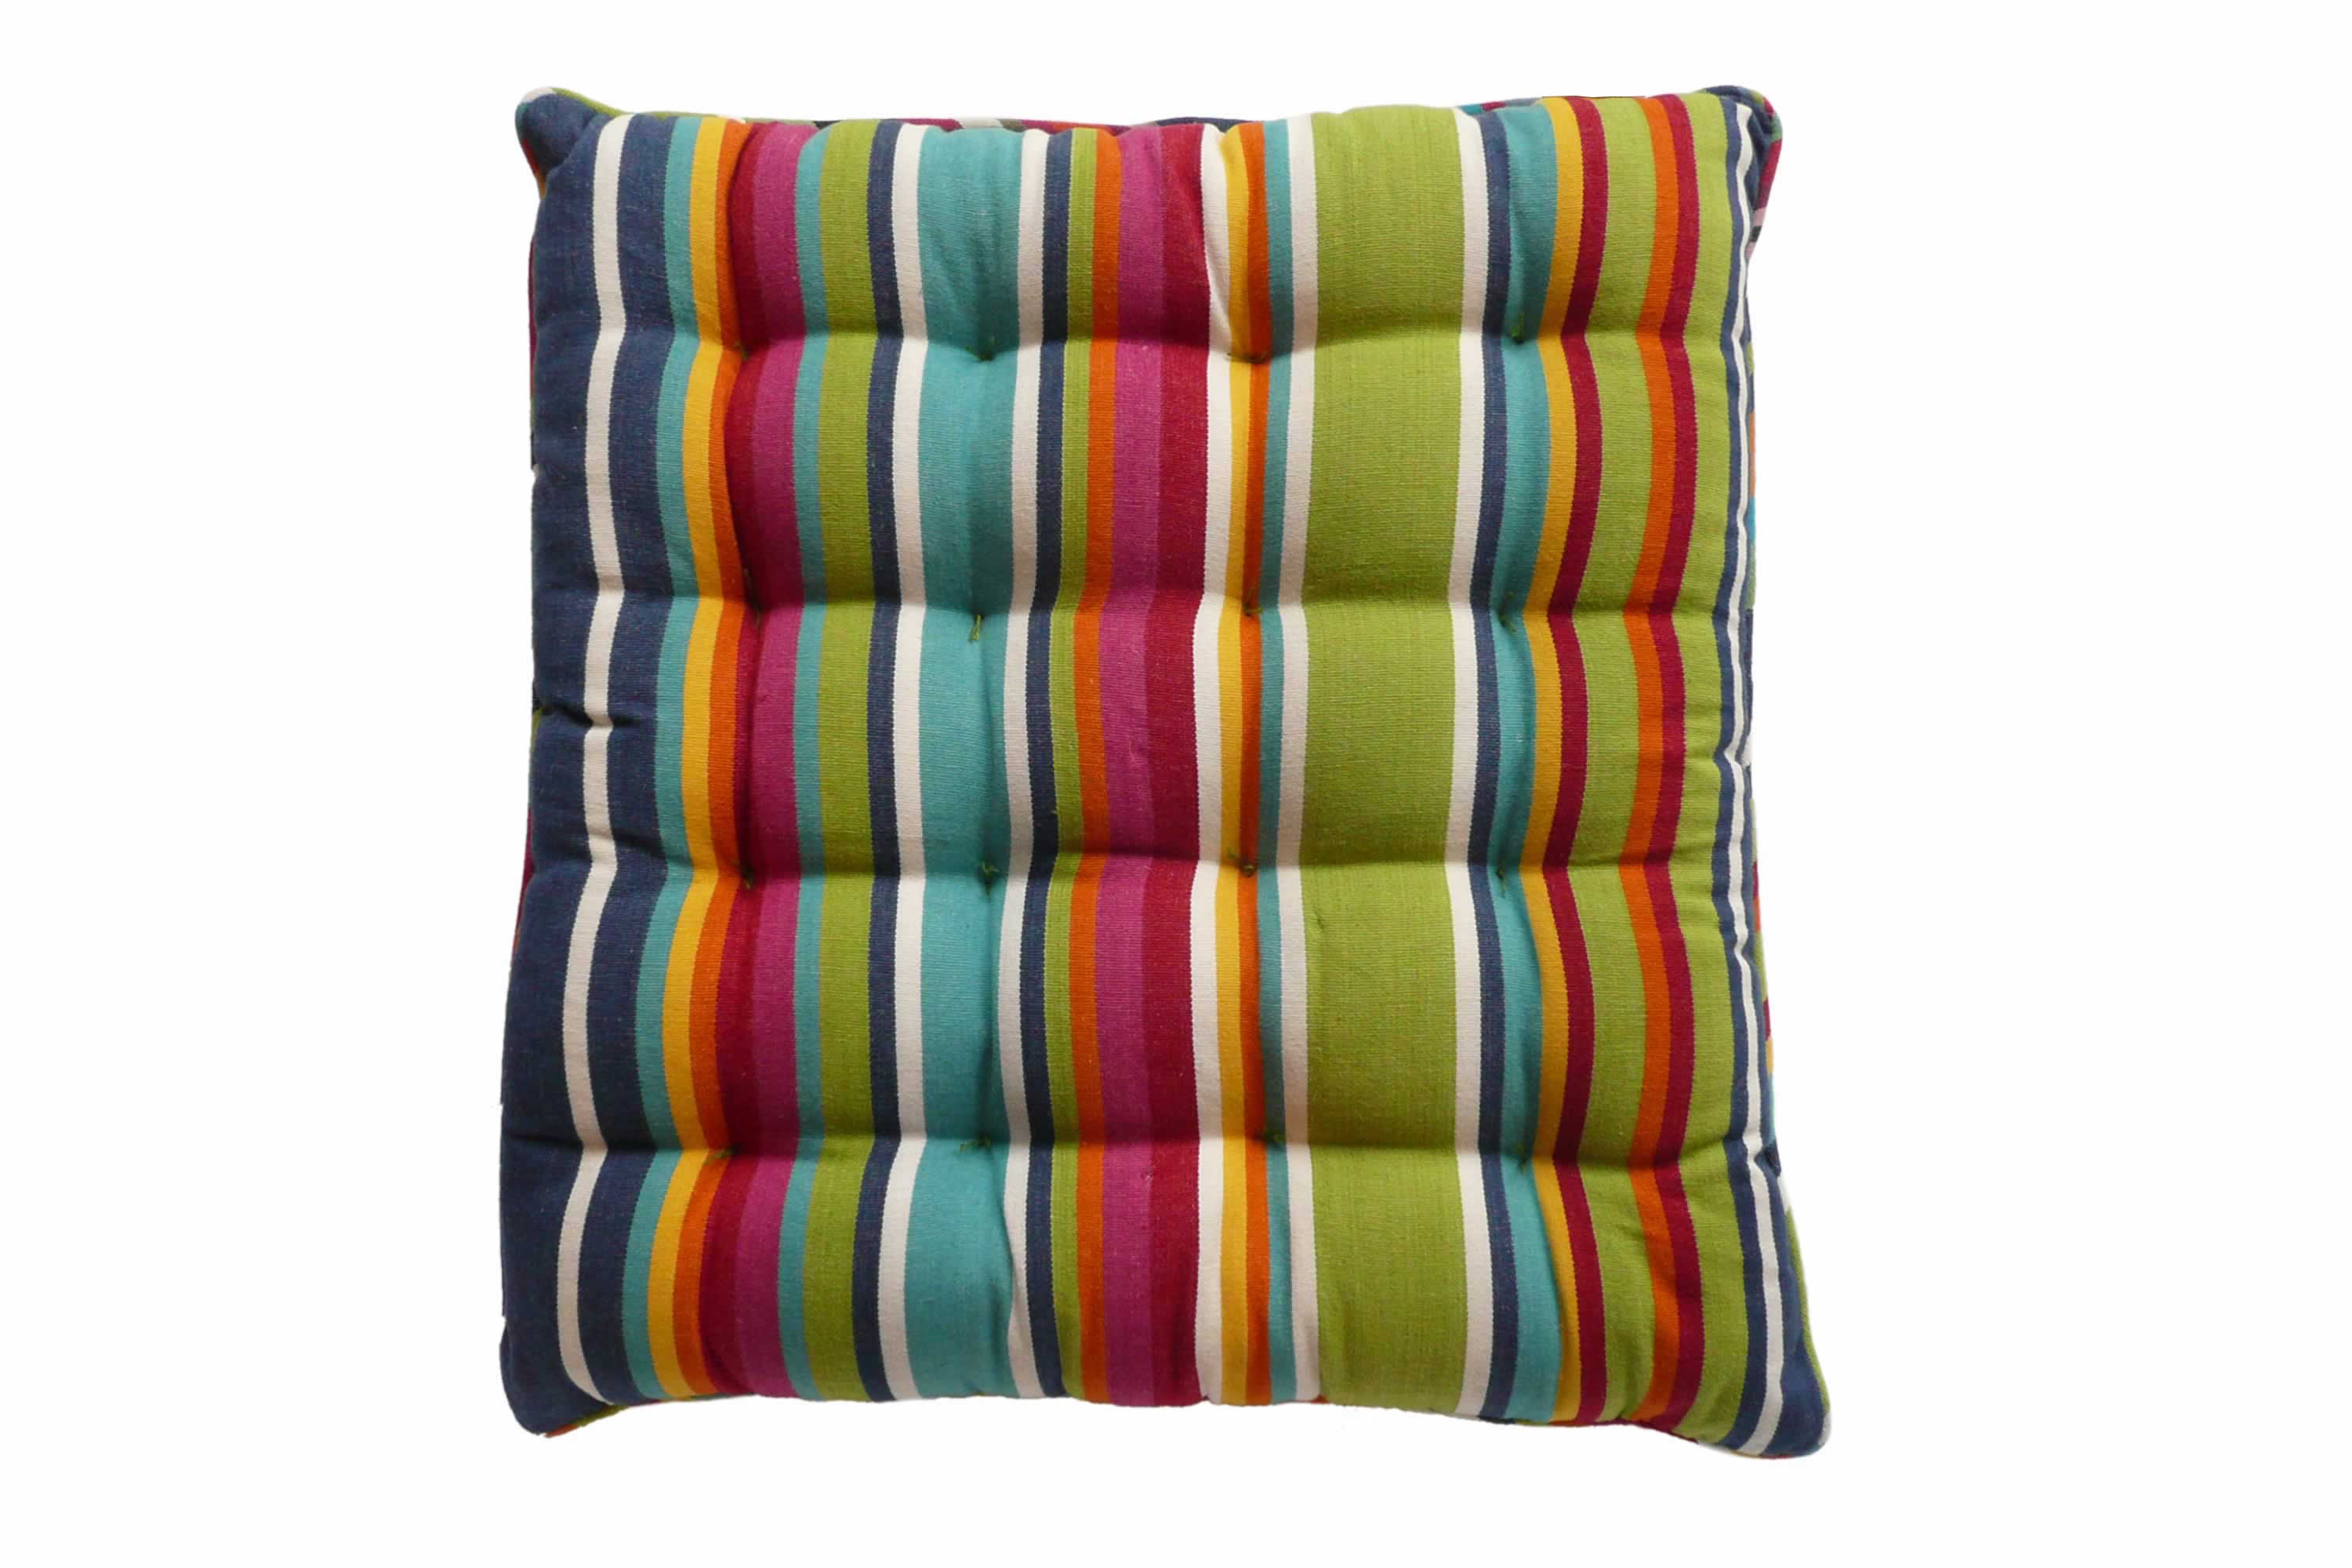 Colourful Striped Seat Pads with Piping | Square Piped Seat Pads blue, green, red   